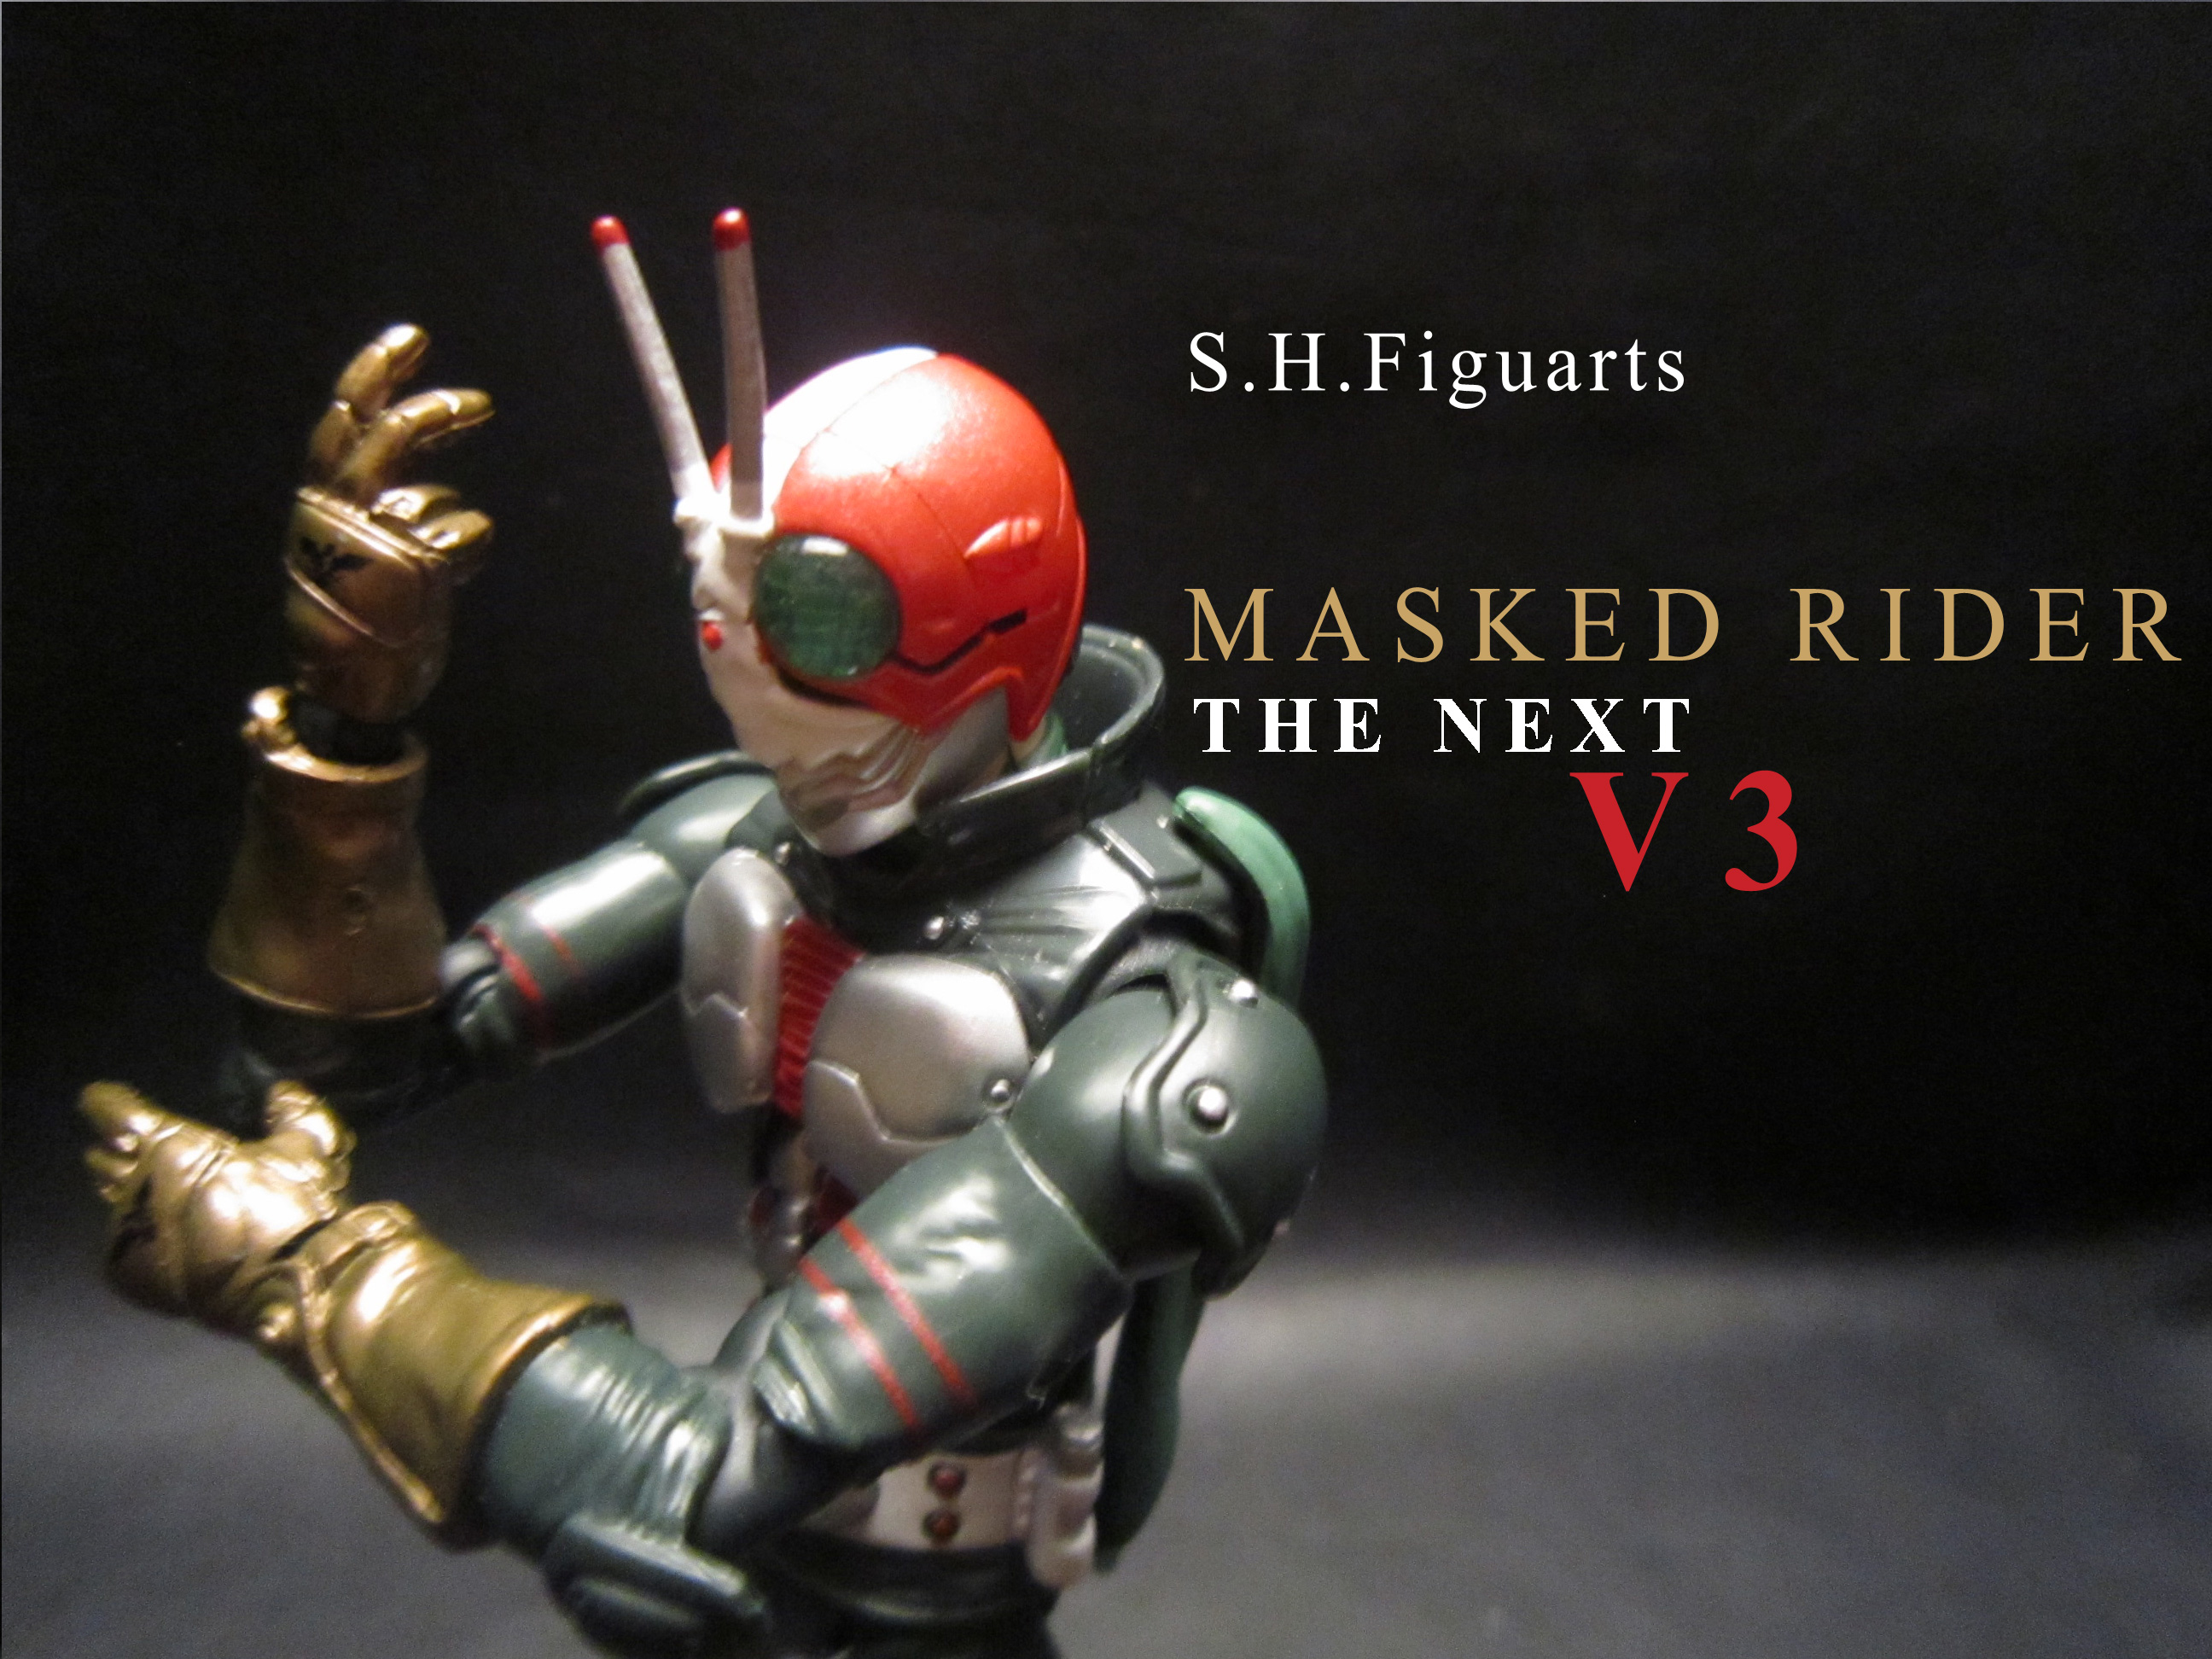 S.H.Figuarts (真骨彫製法) 仮面ライダーV3